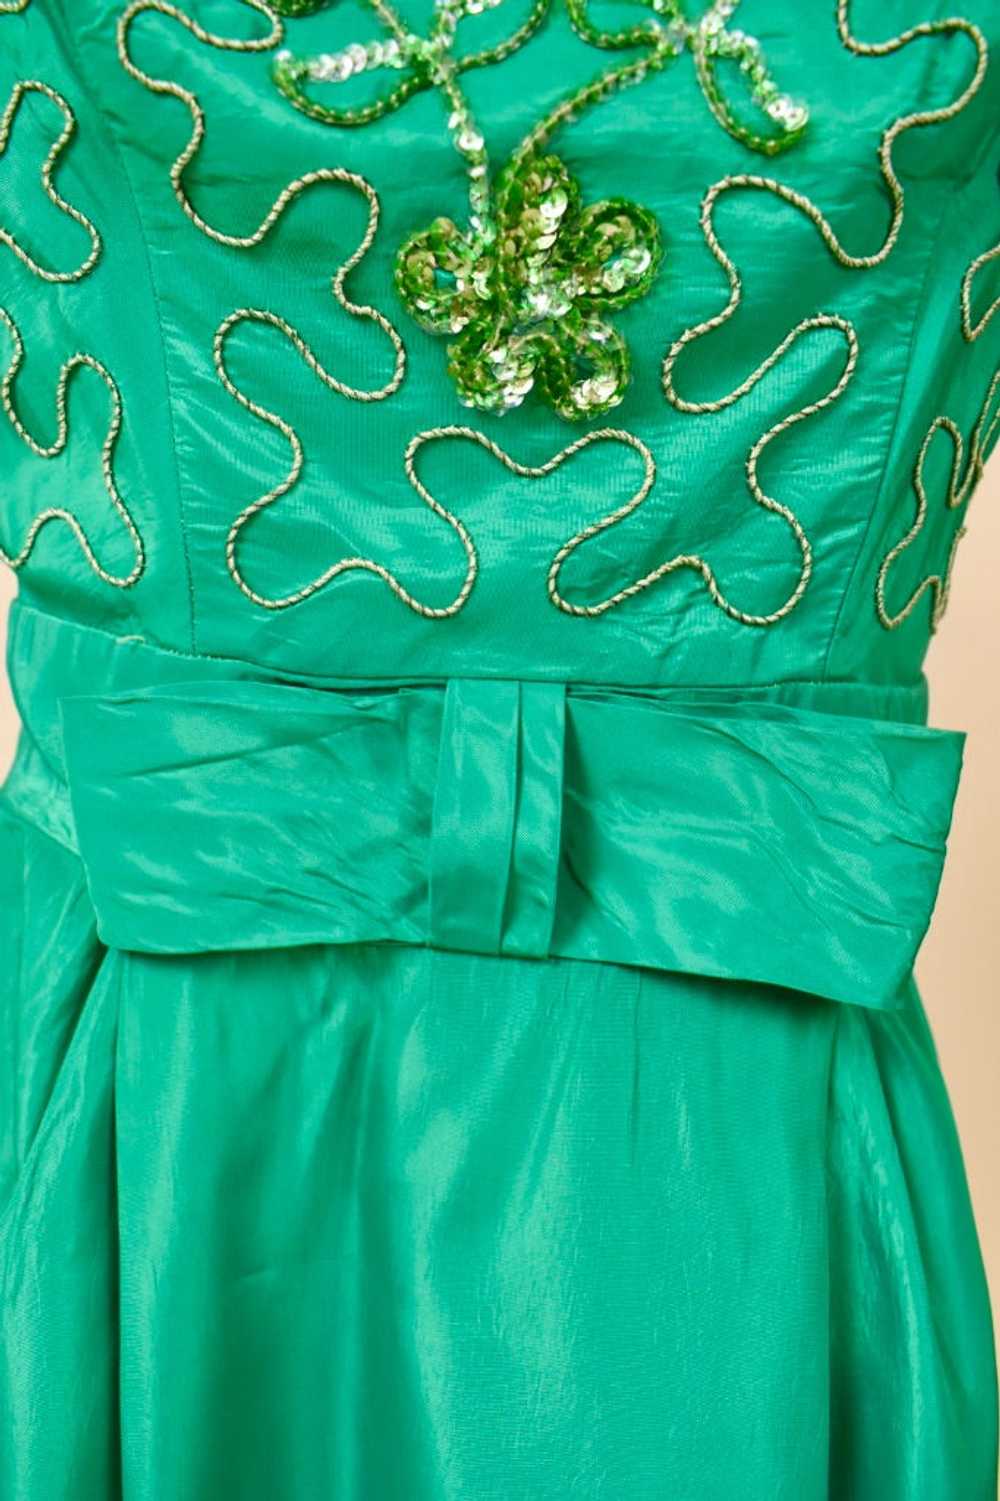 Green 60s Party Dress with Sequin Flowers, XS - image 5